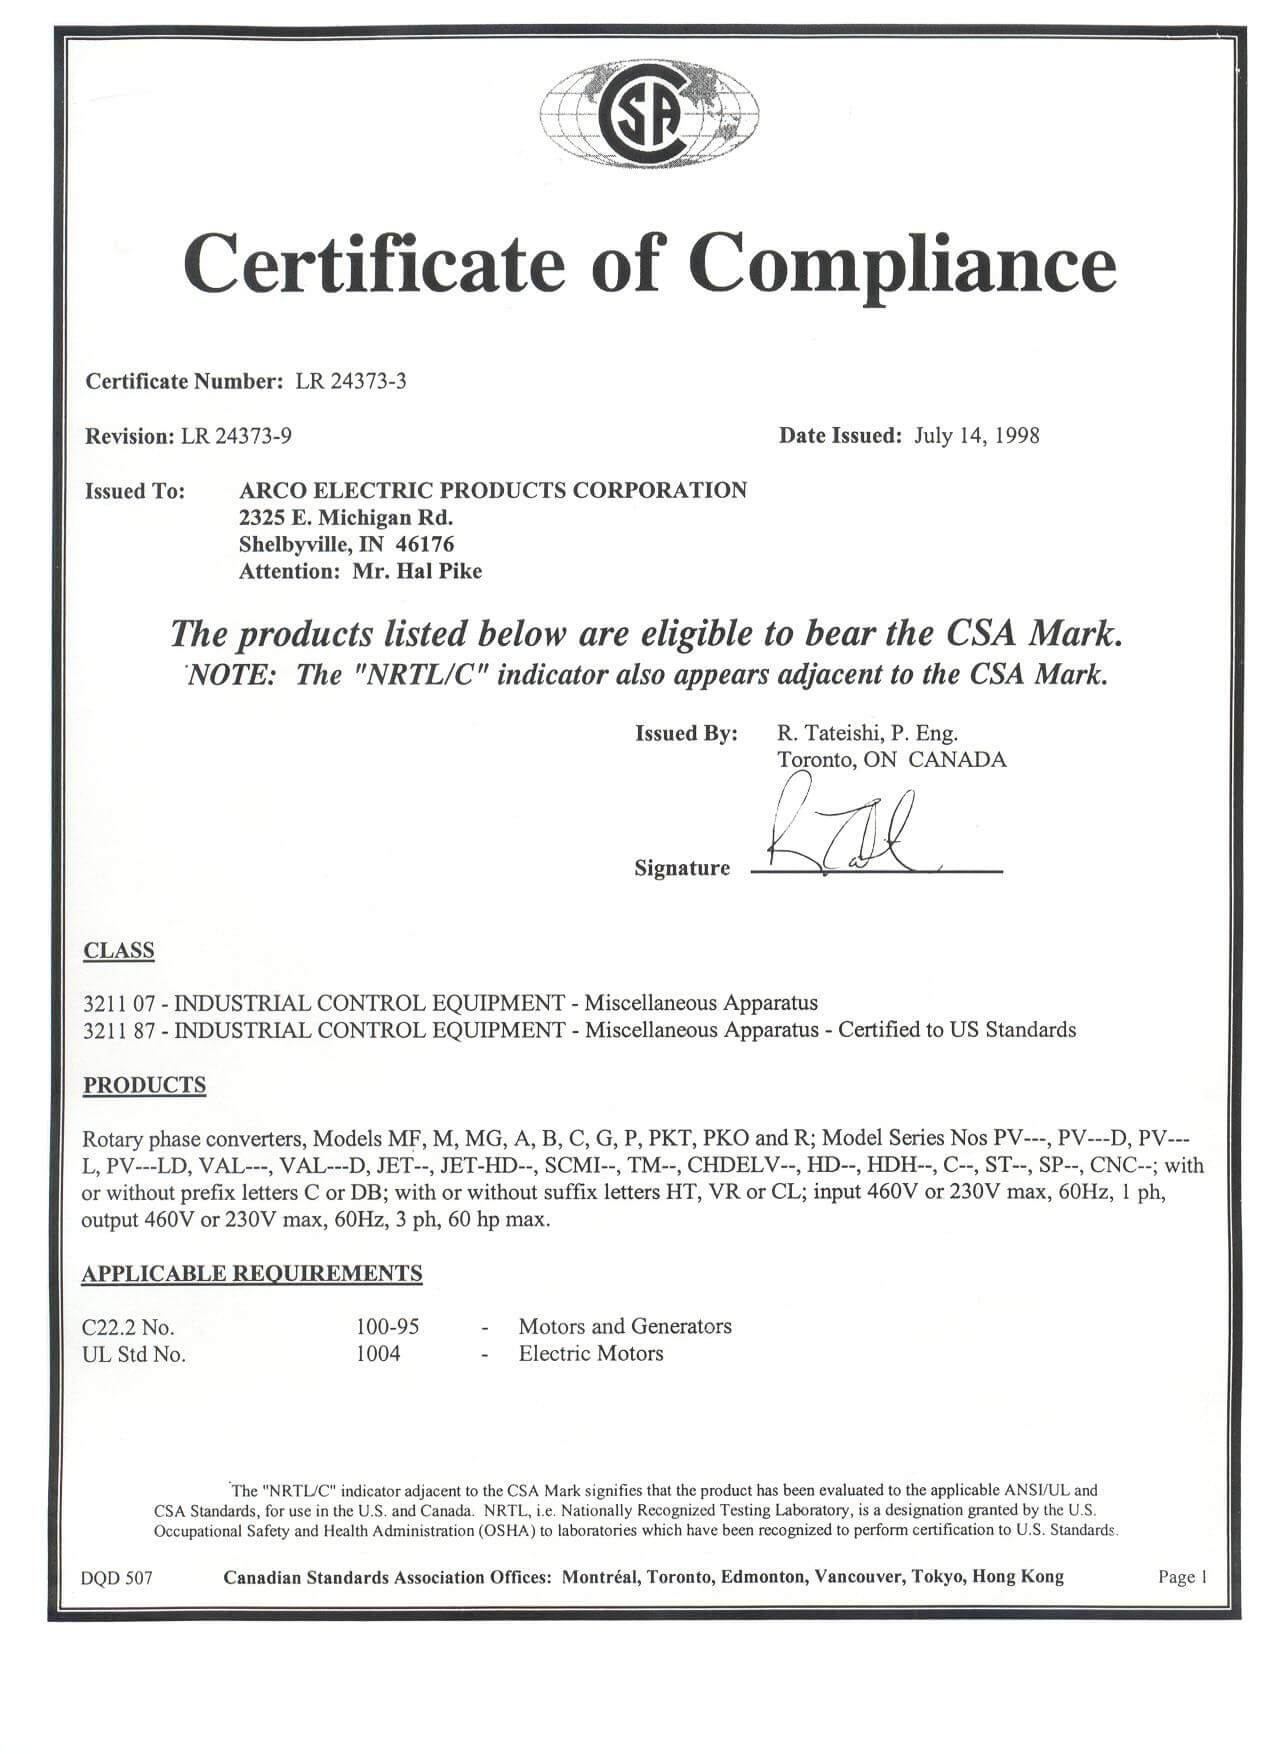 Whitlock Instrument Certificate Of Compliance Dnft Pin Rohs Throughout Certificate Of Compliance Template